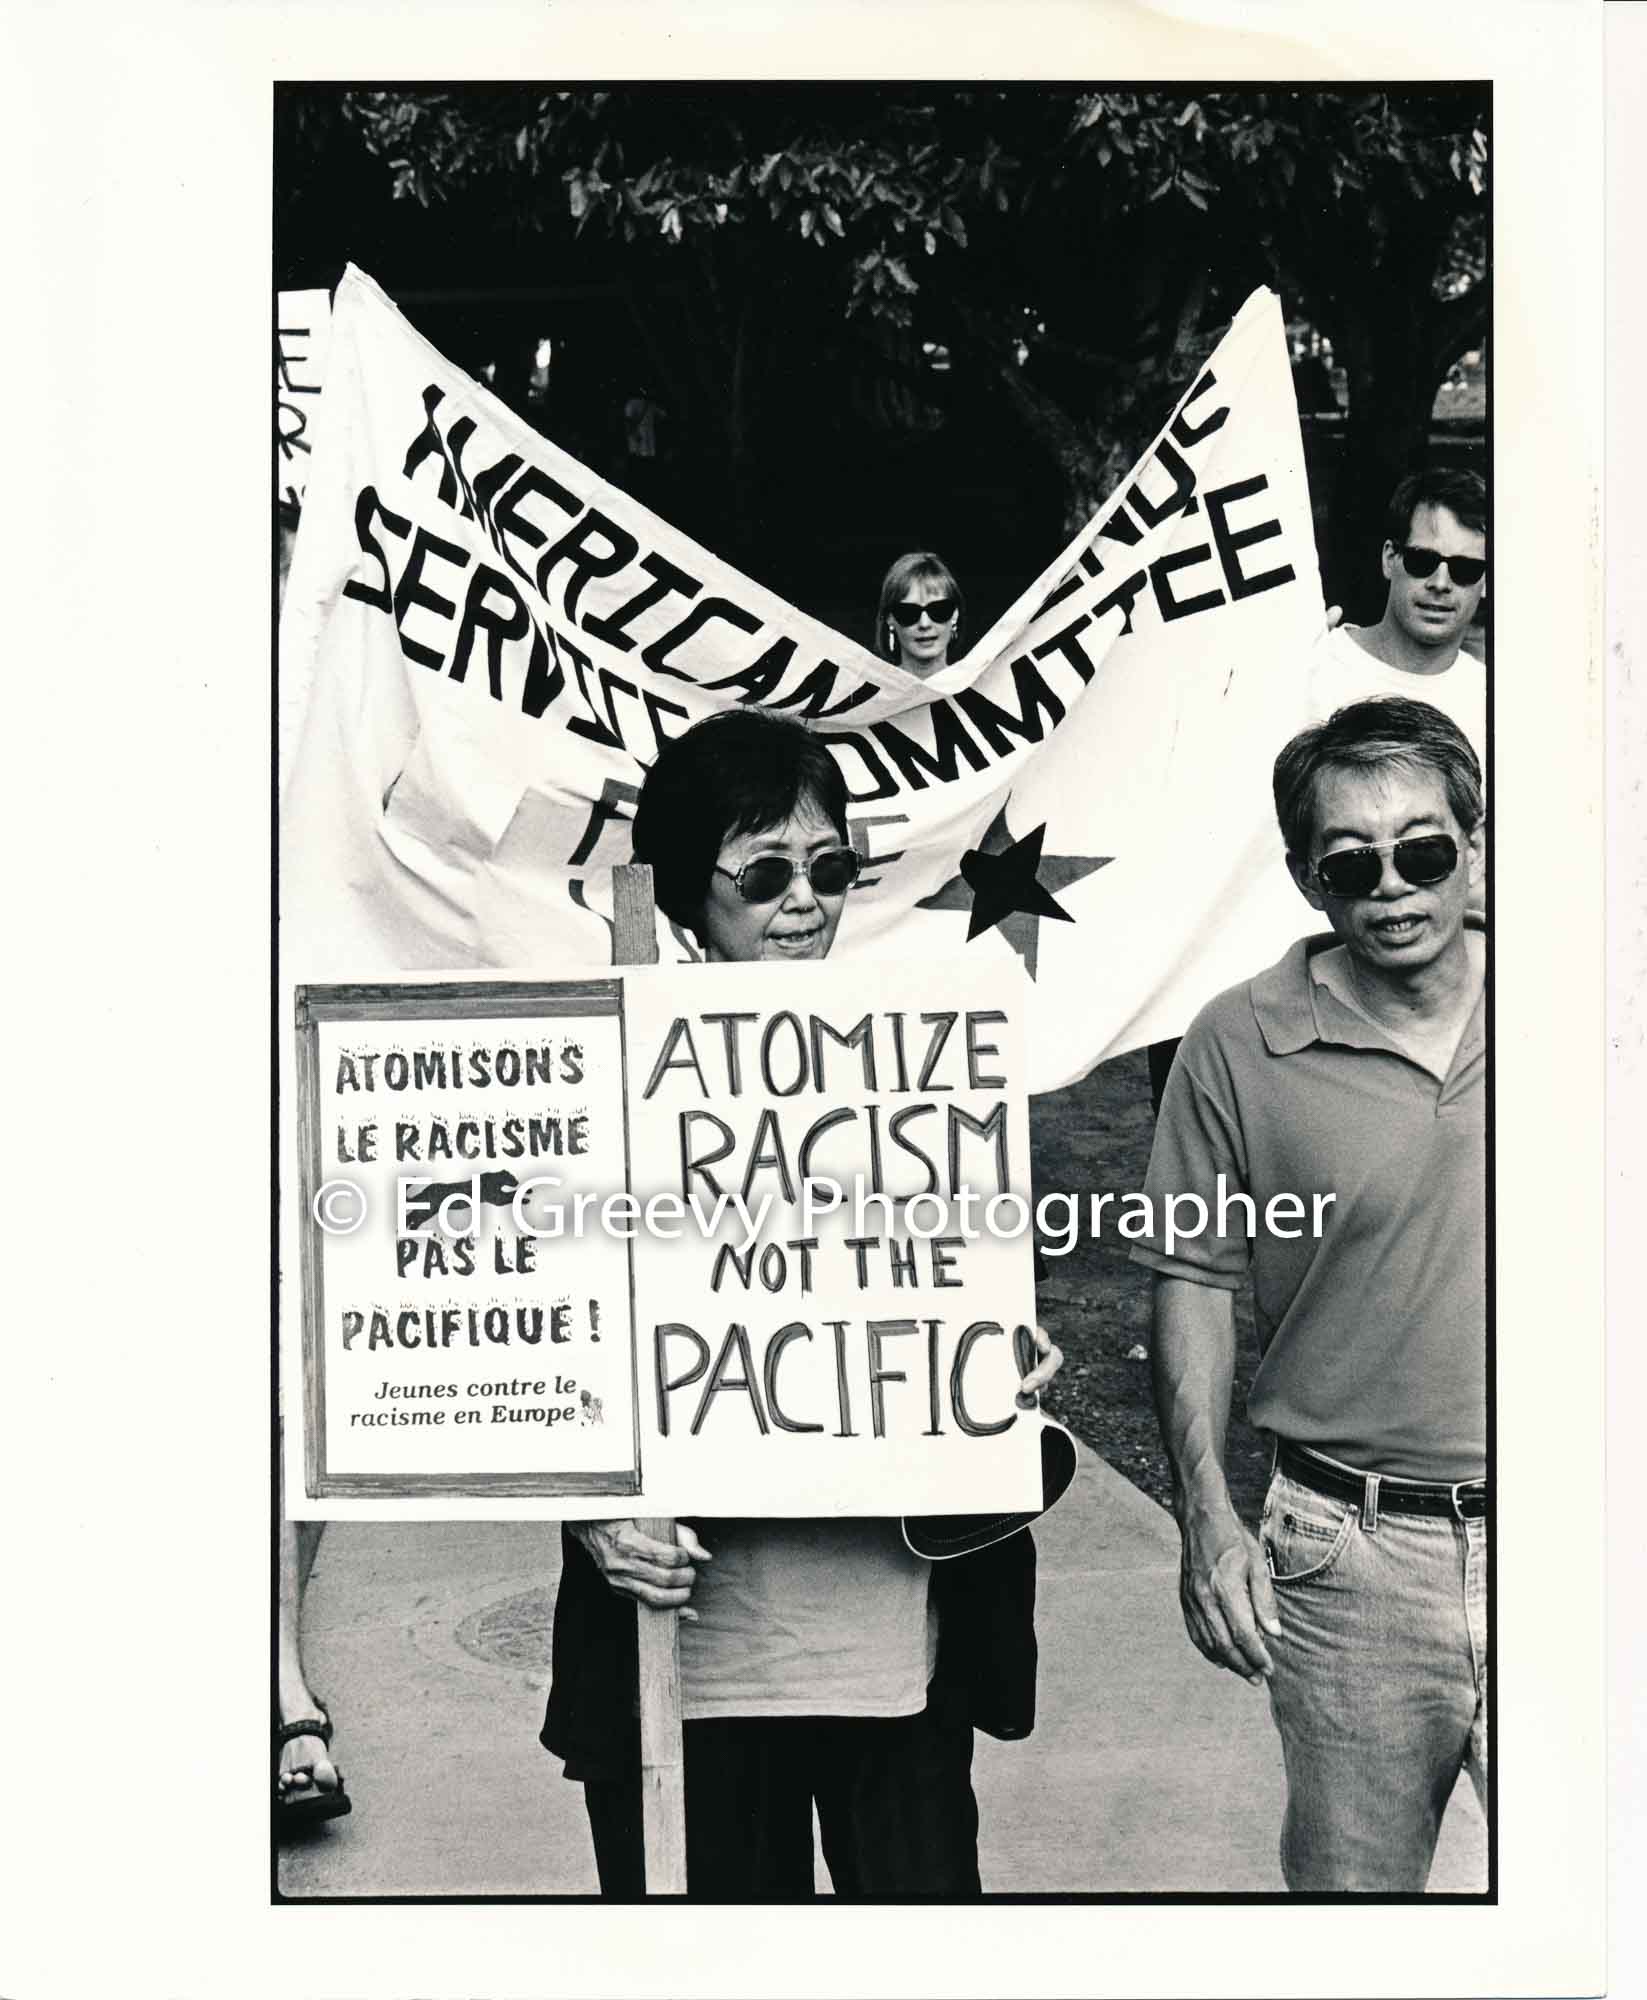 Save our Surf member Barry Nakamura and Mary Choy at demonstration | Ed Greevy Photographer